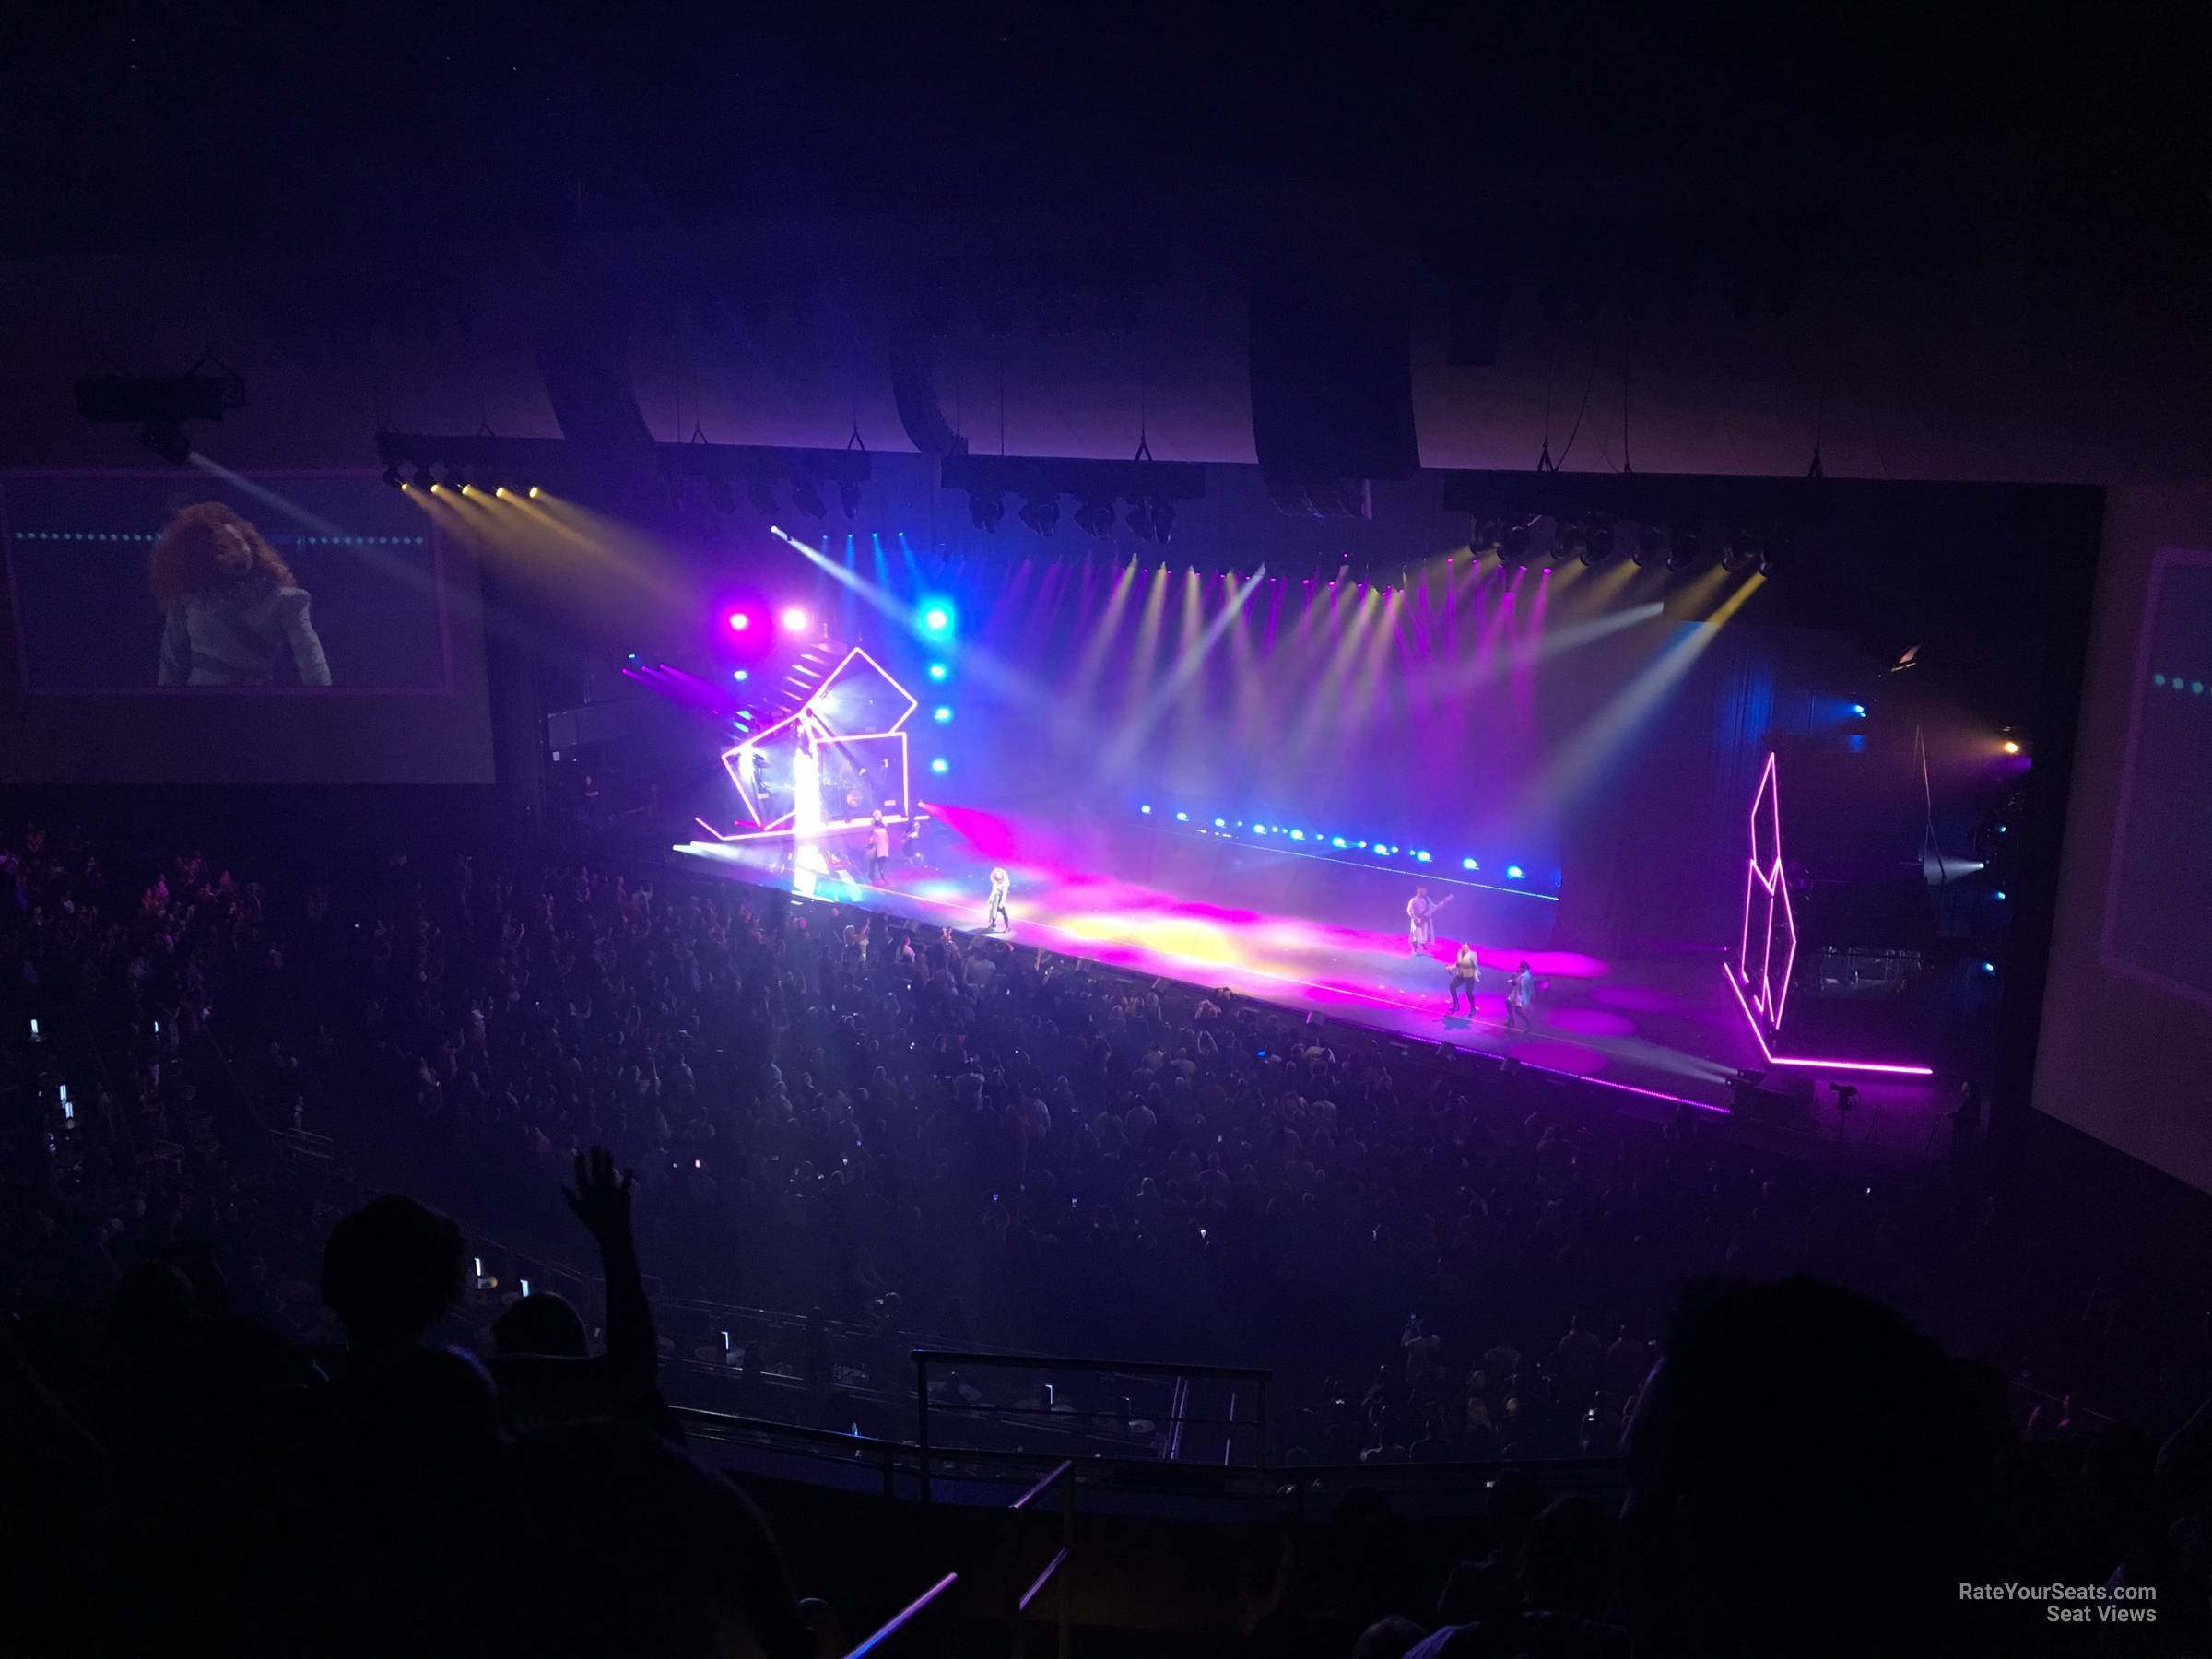 section 402, row f seat view  - dolby live at park mgm